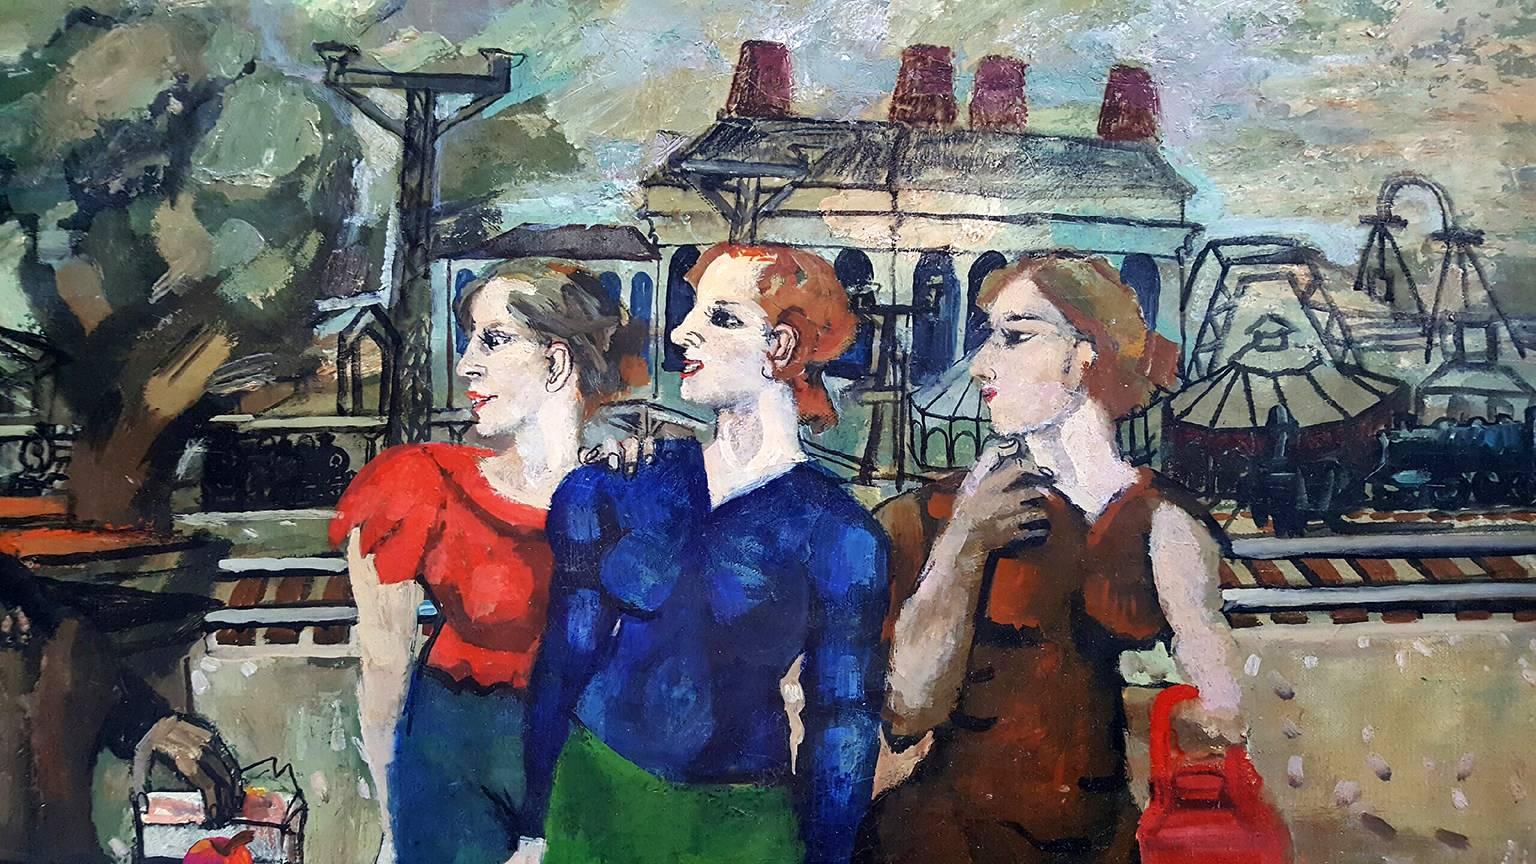 Railroad Men's Wives - Painting by Philip Evergood